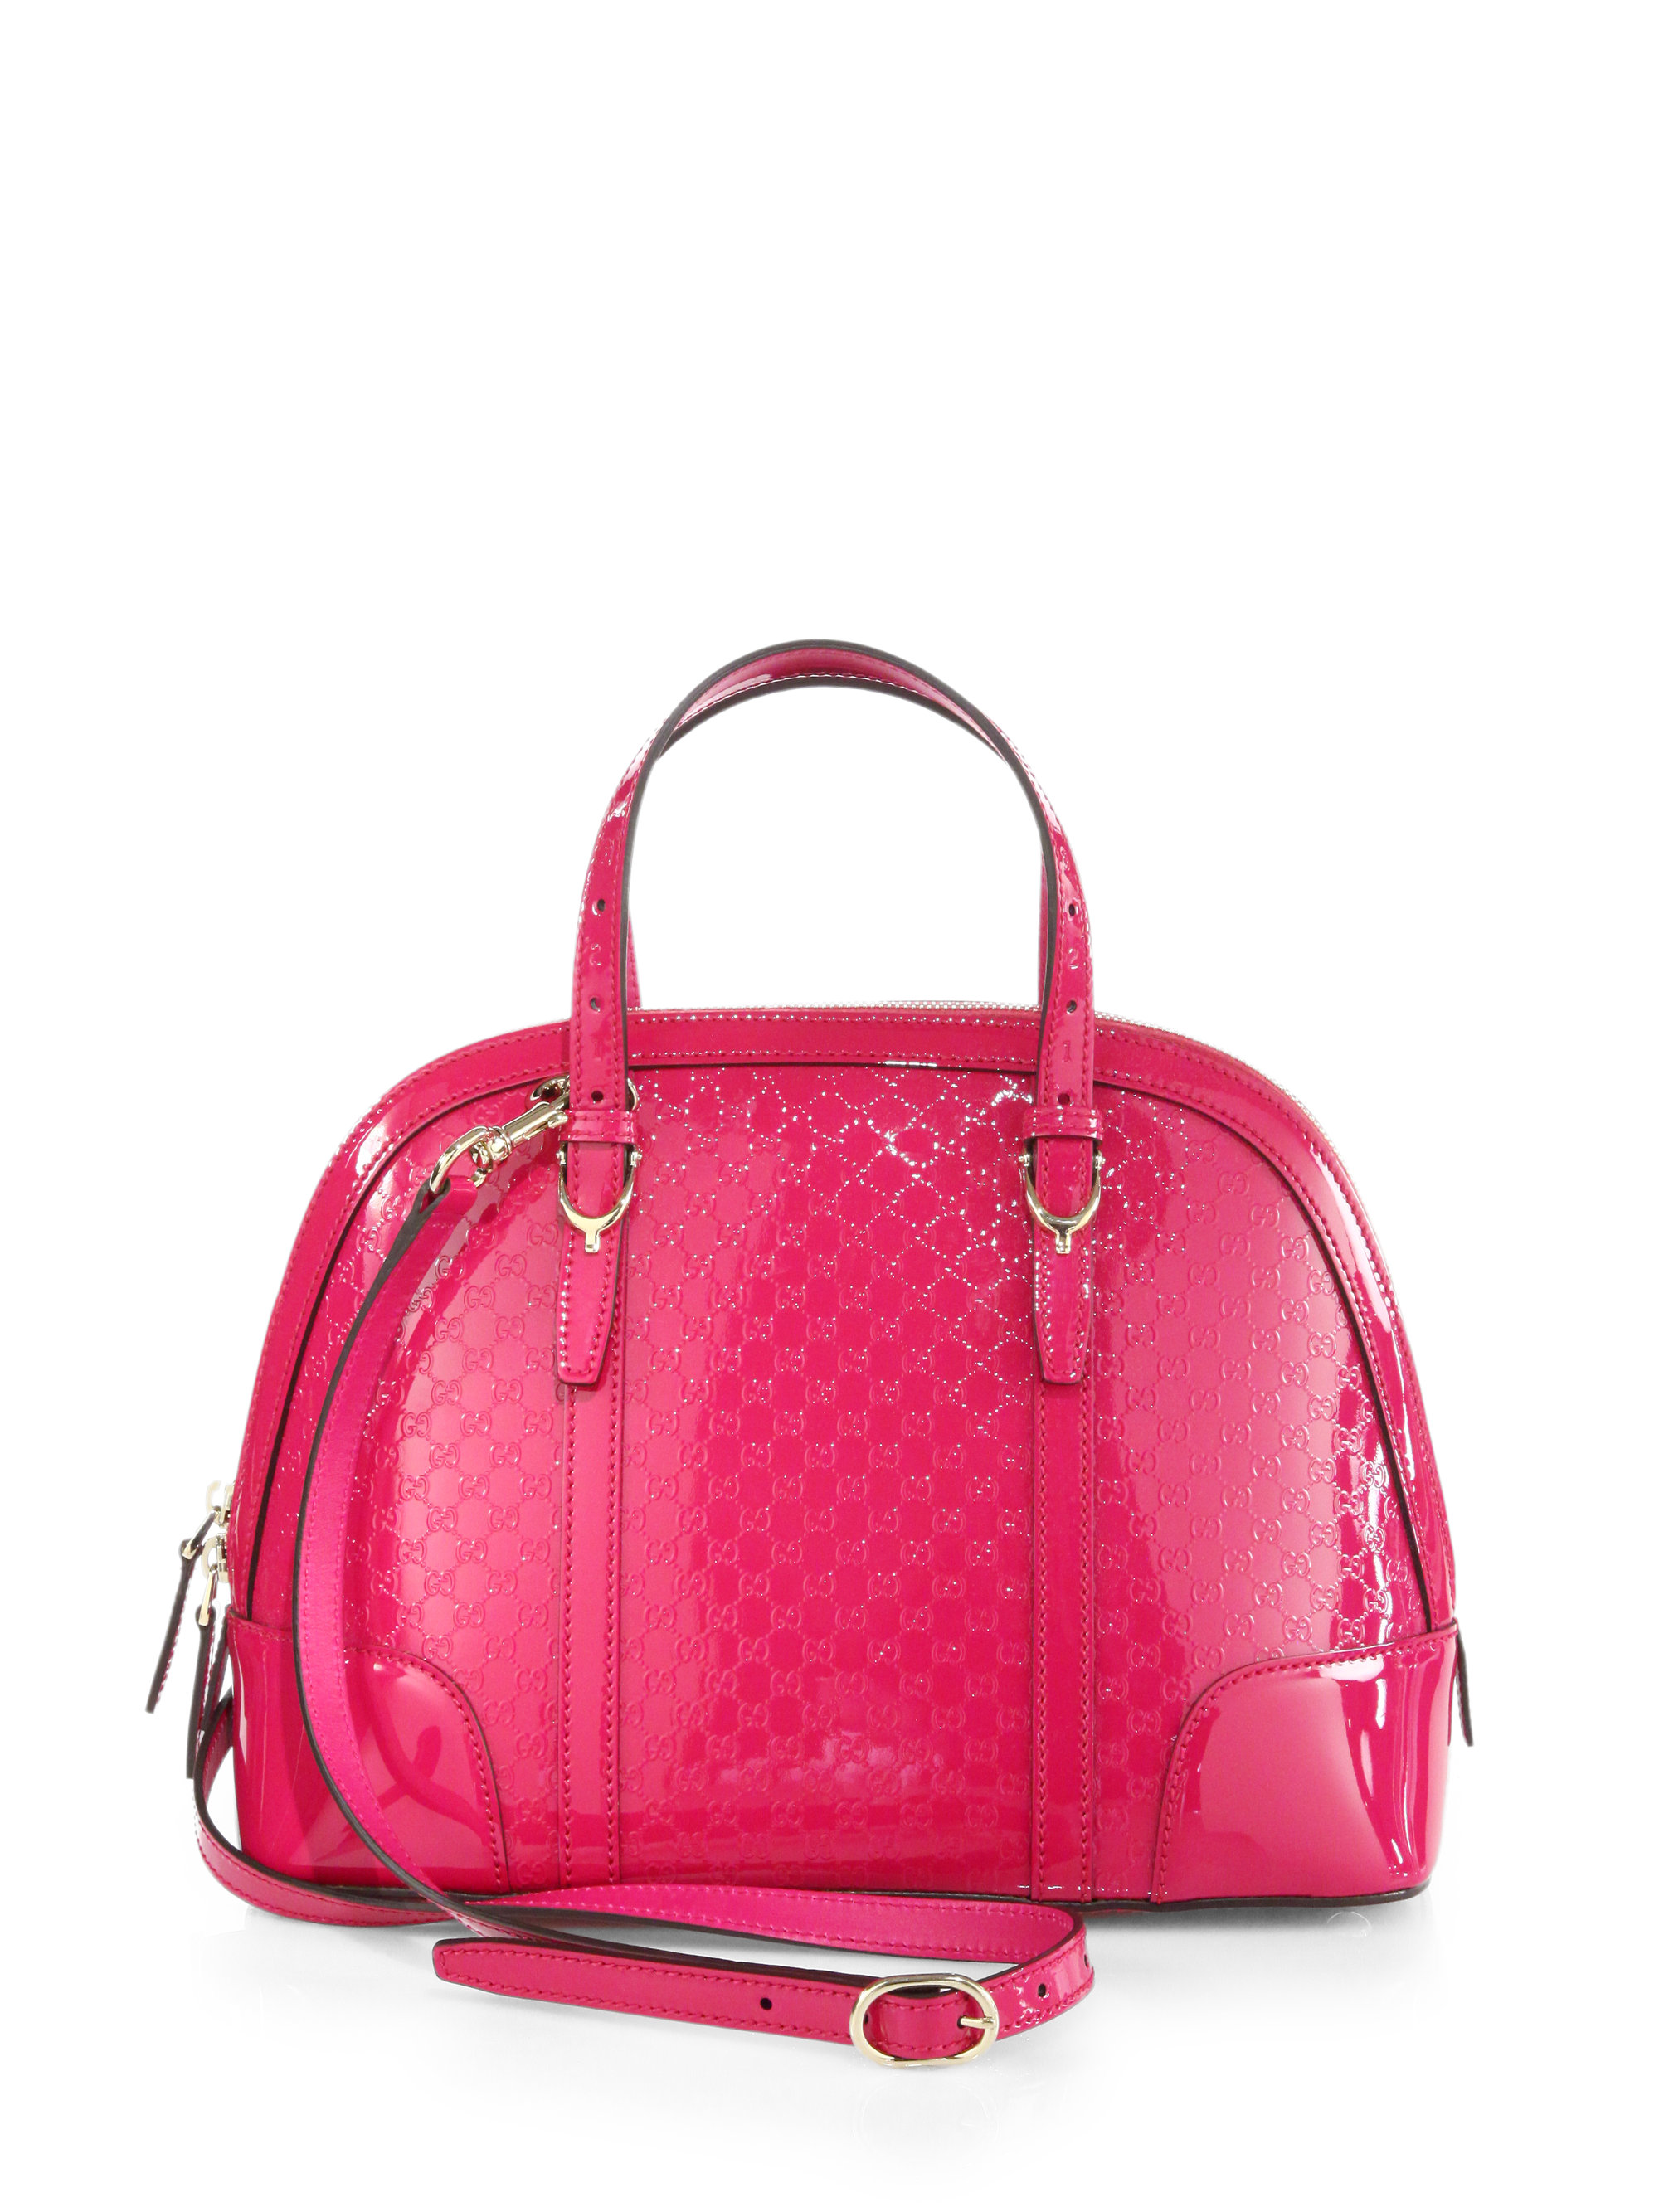 Lyst - Gucci Nice Microssima Patent Leather Top Handle Bag in Pink